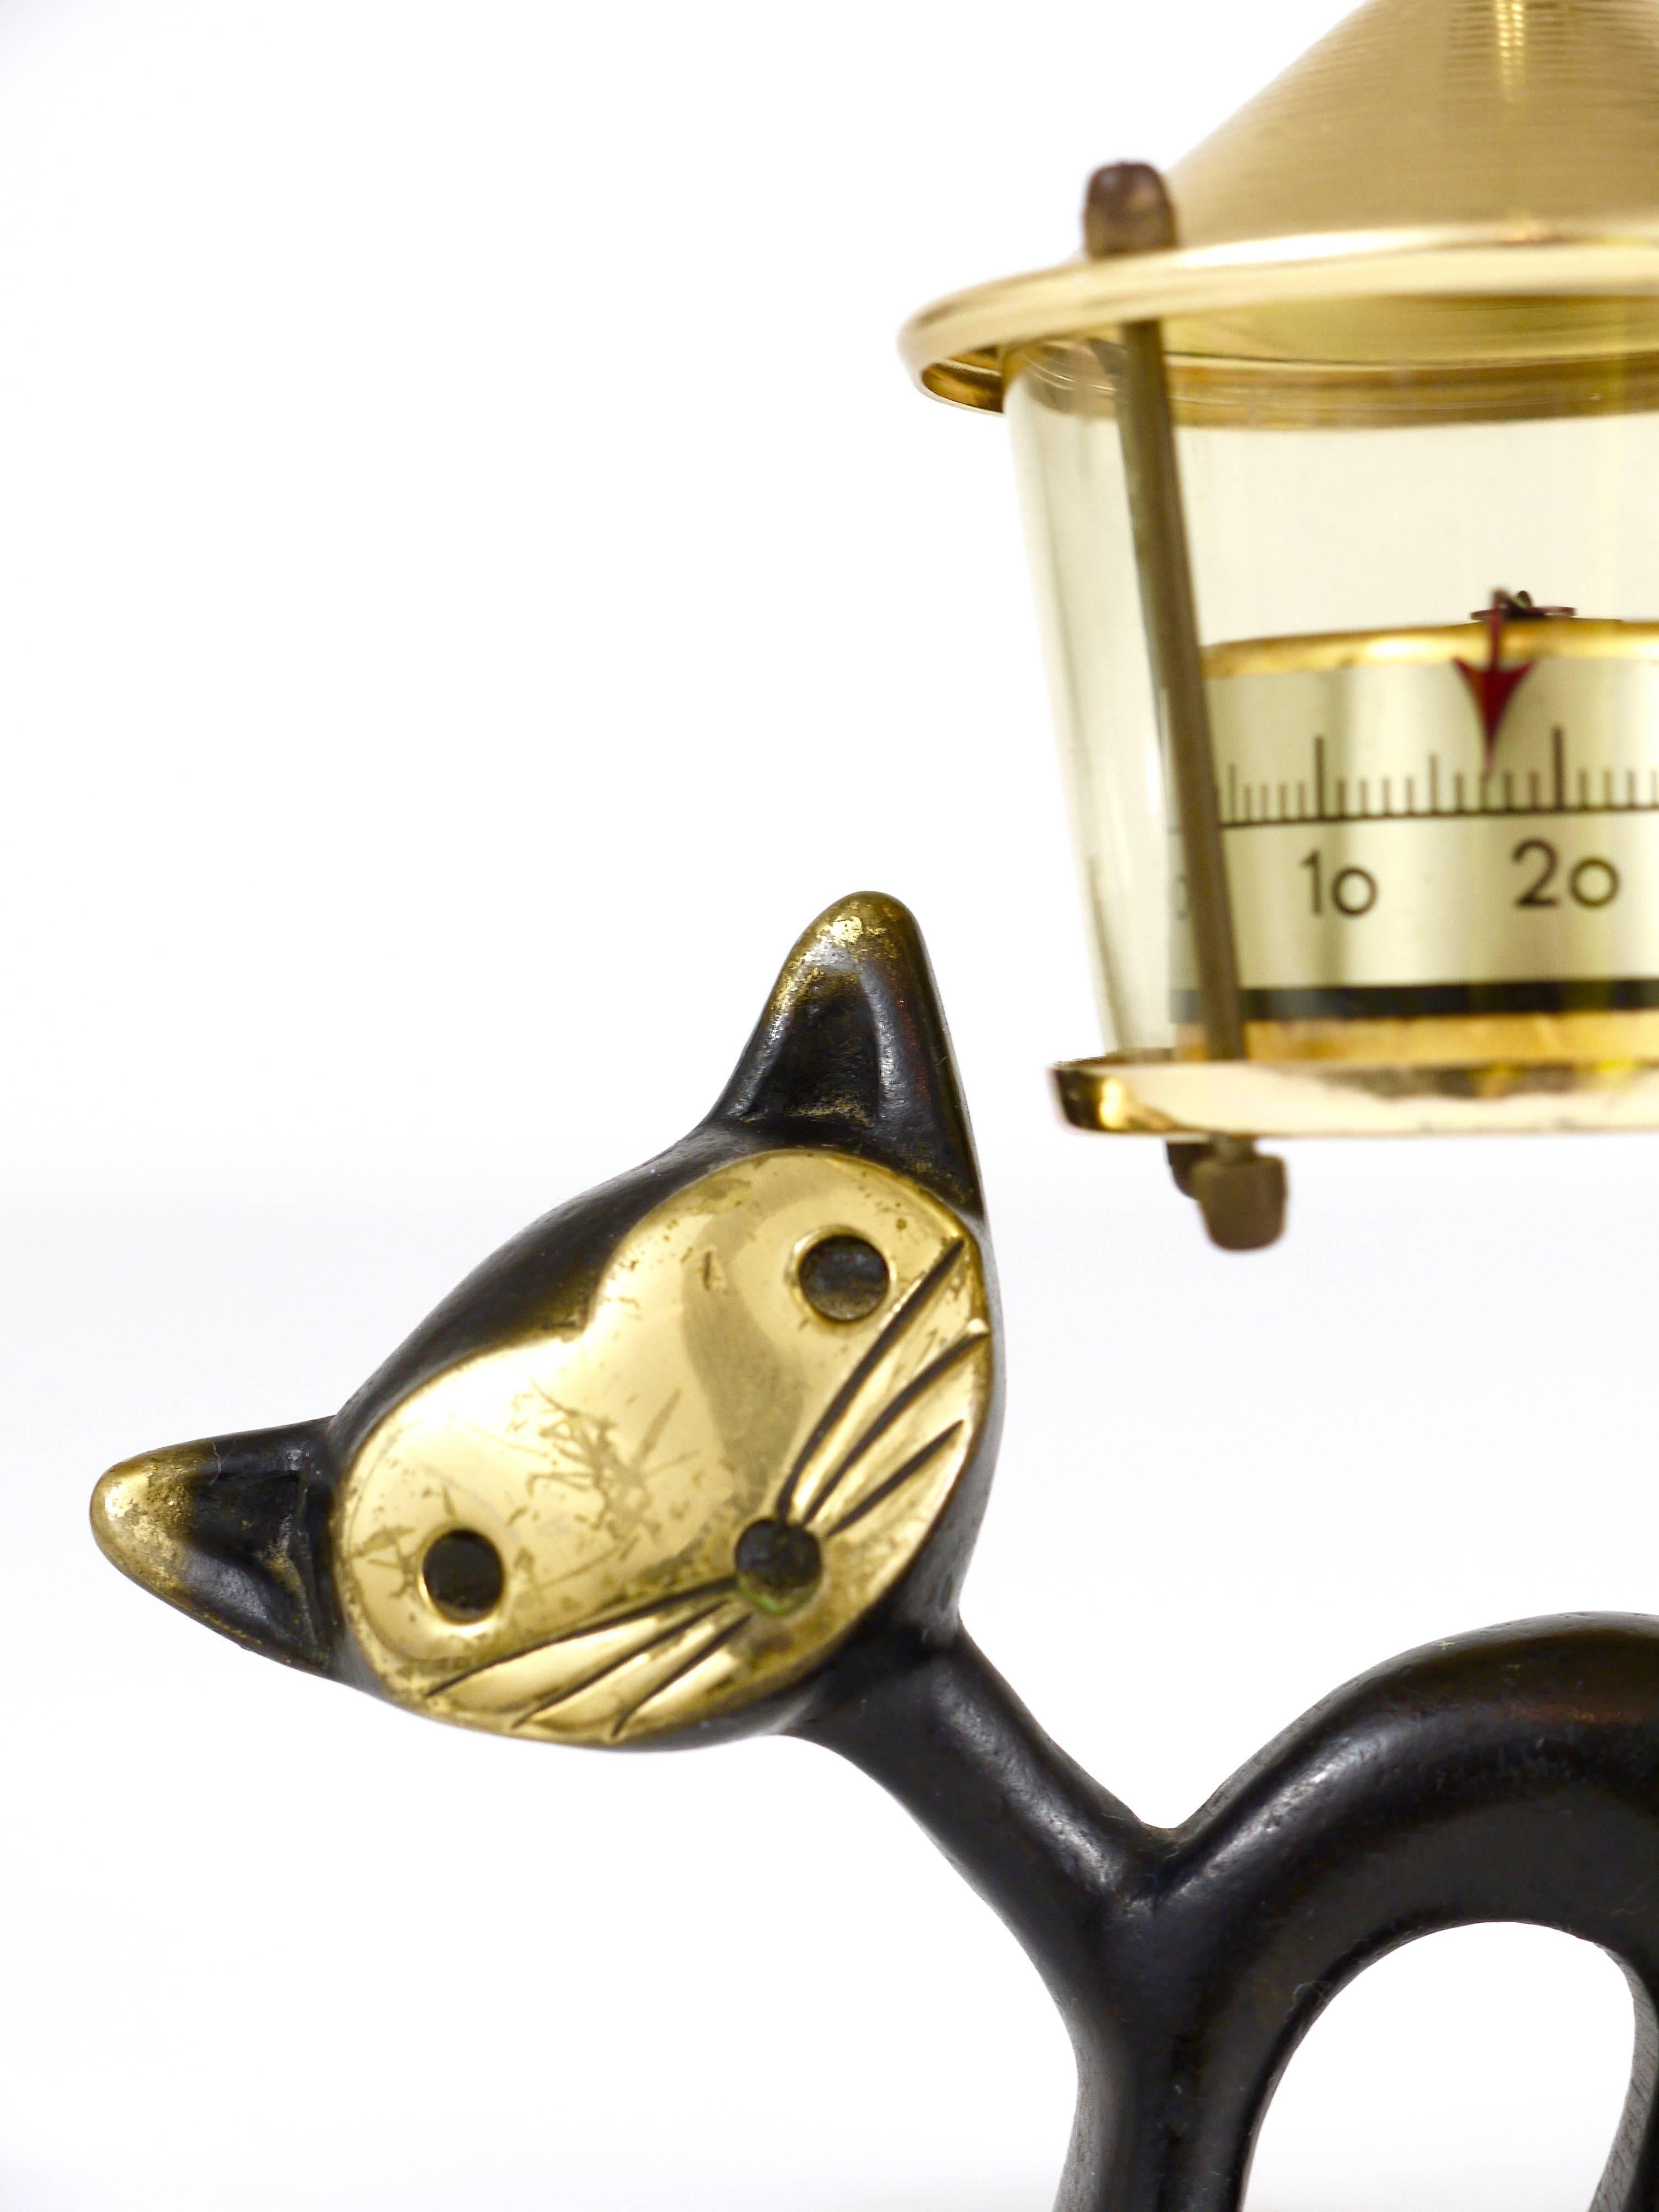 A charming Austrian Mid Century modern desk thermometer, consisting of a nice cat figurine and a lantern-shaped thermometer. A humorous design by Walter Bosse, executed by Hertha Baller Austria in the 1950s. Made of brass, in good condition, nice